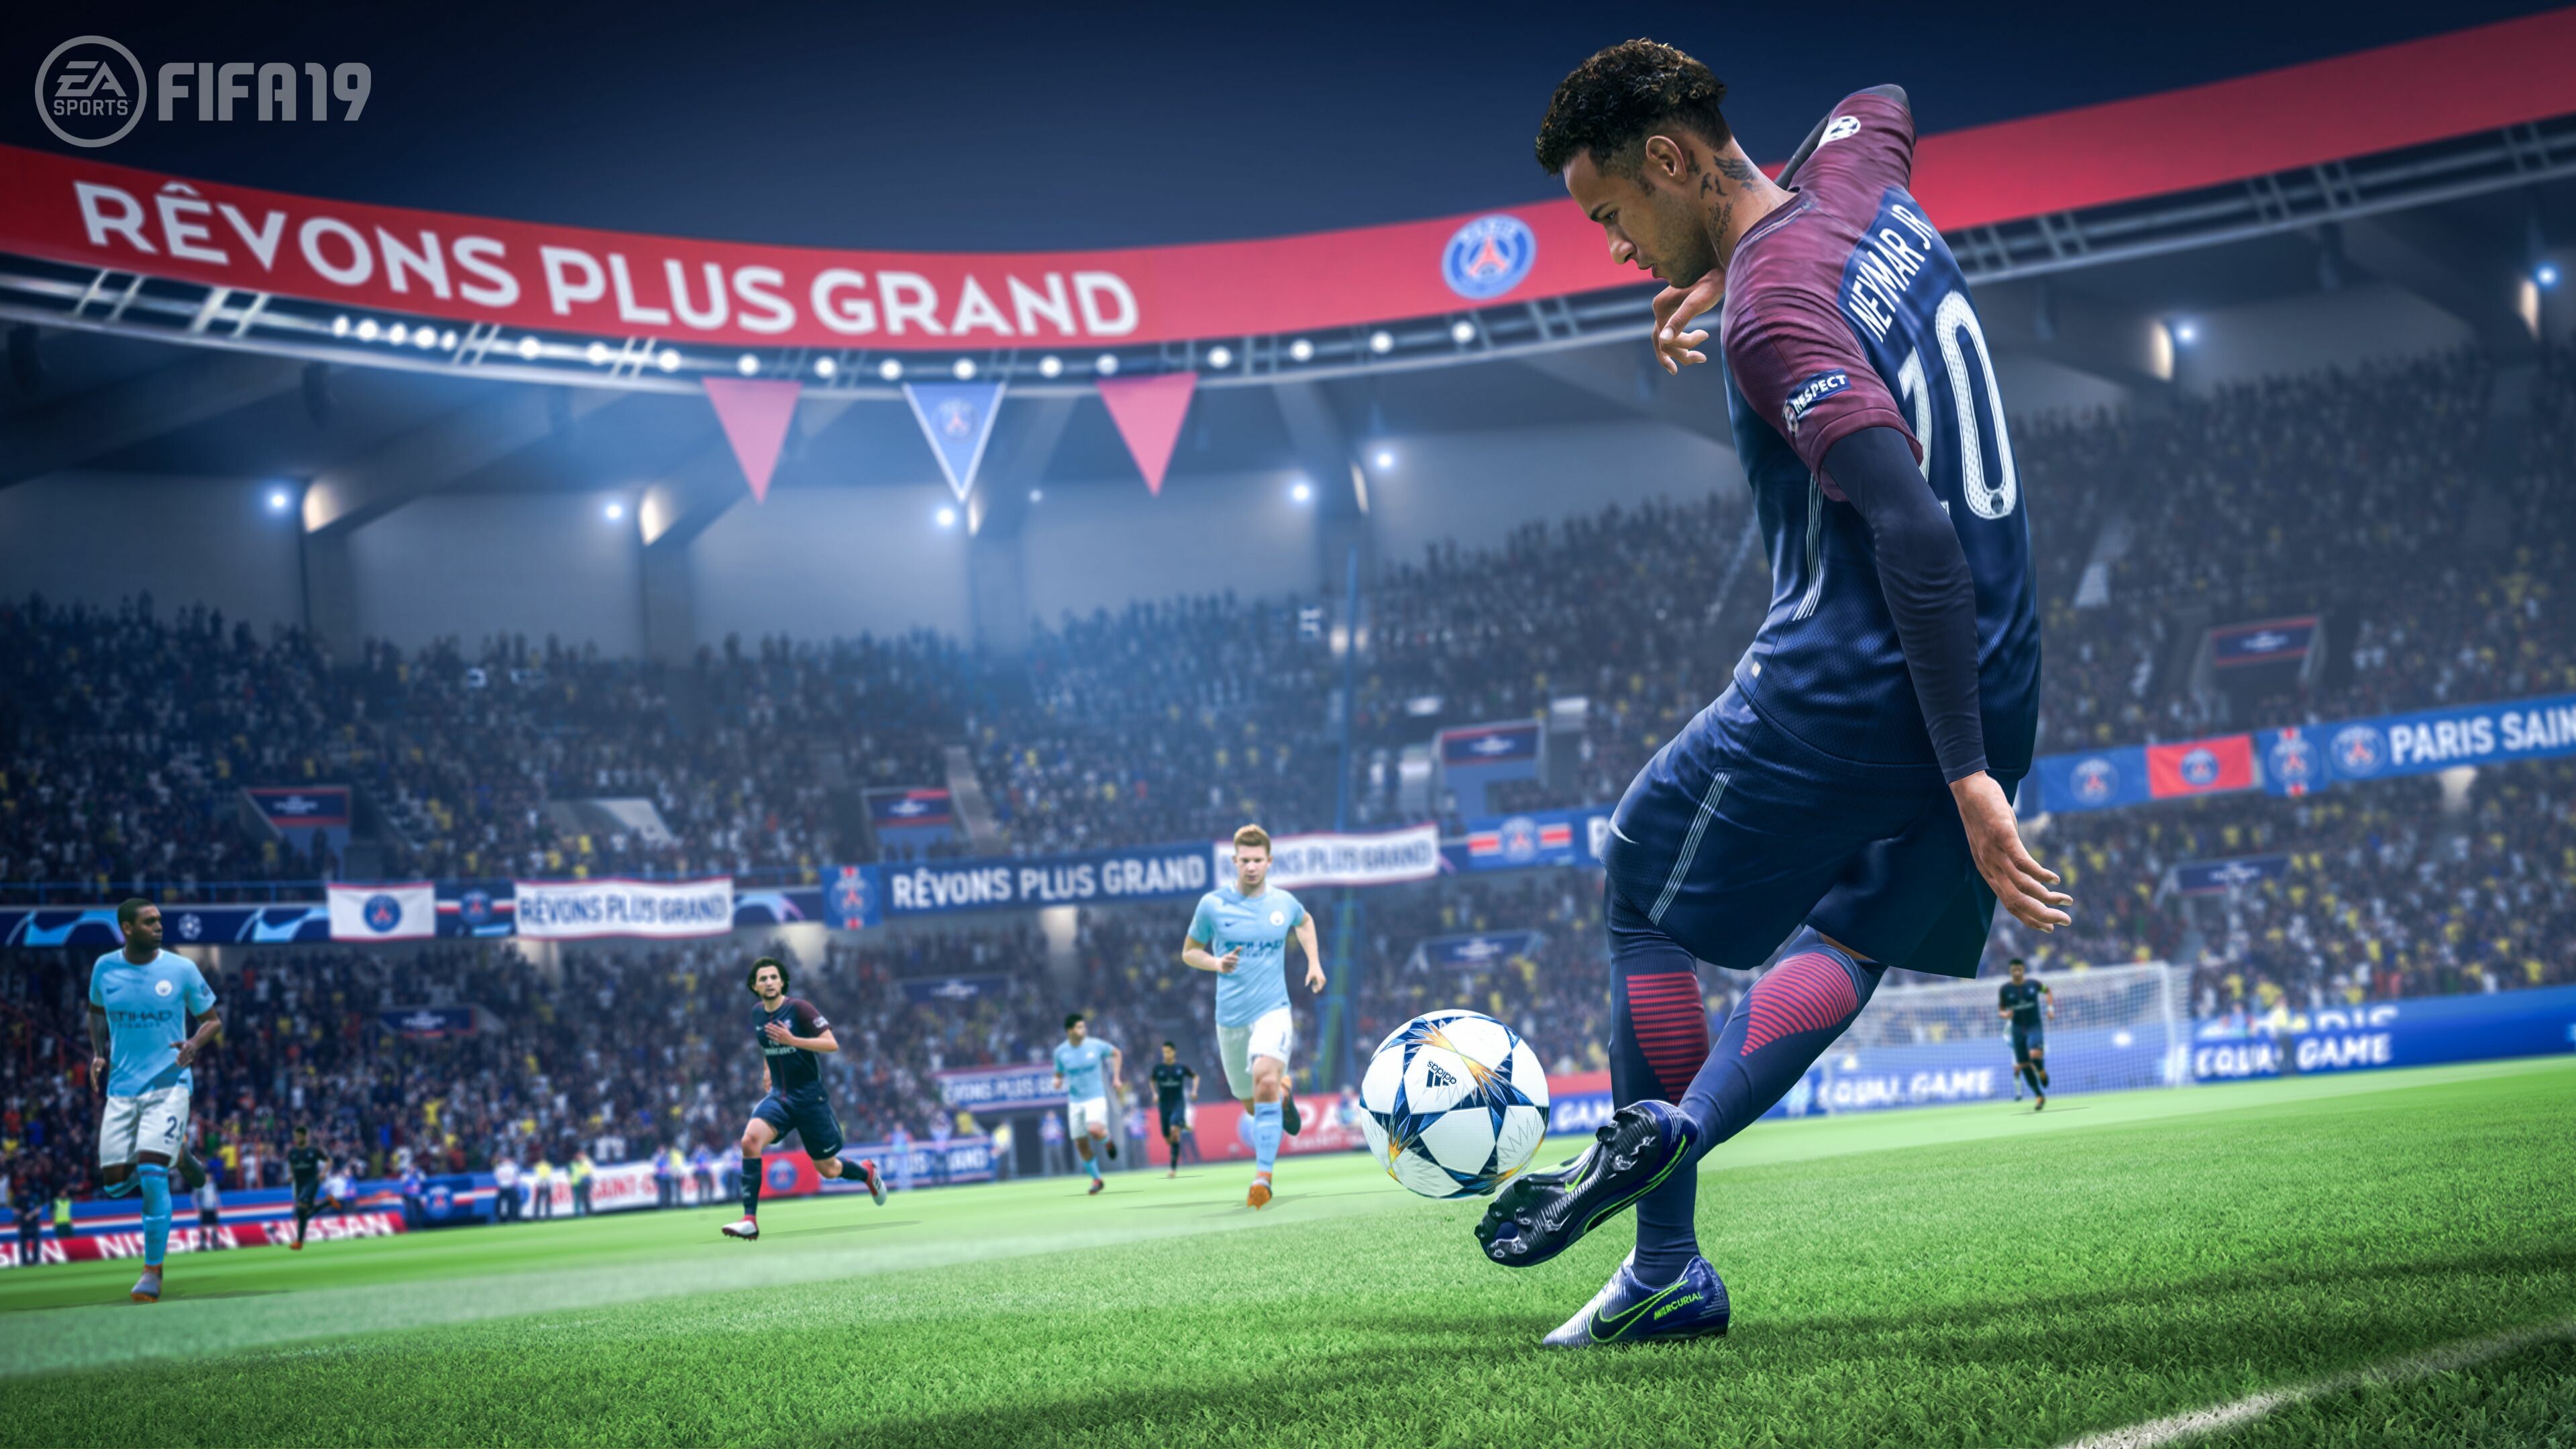 FIFA: A football simulation video game developed by EA Vancouver, 2019. 3840x2160 4K Wallpaper.